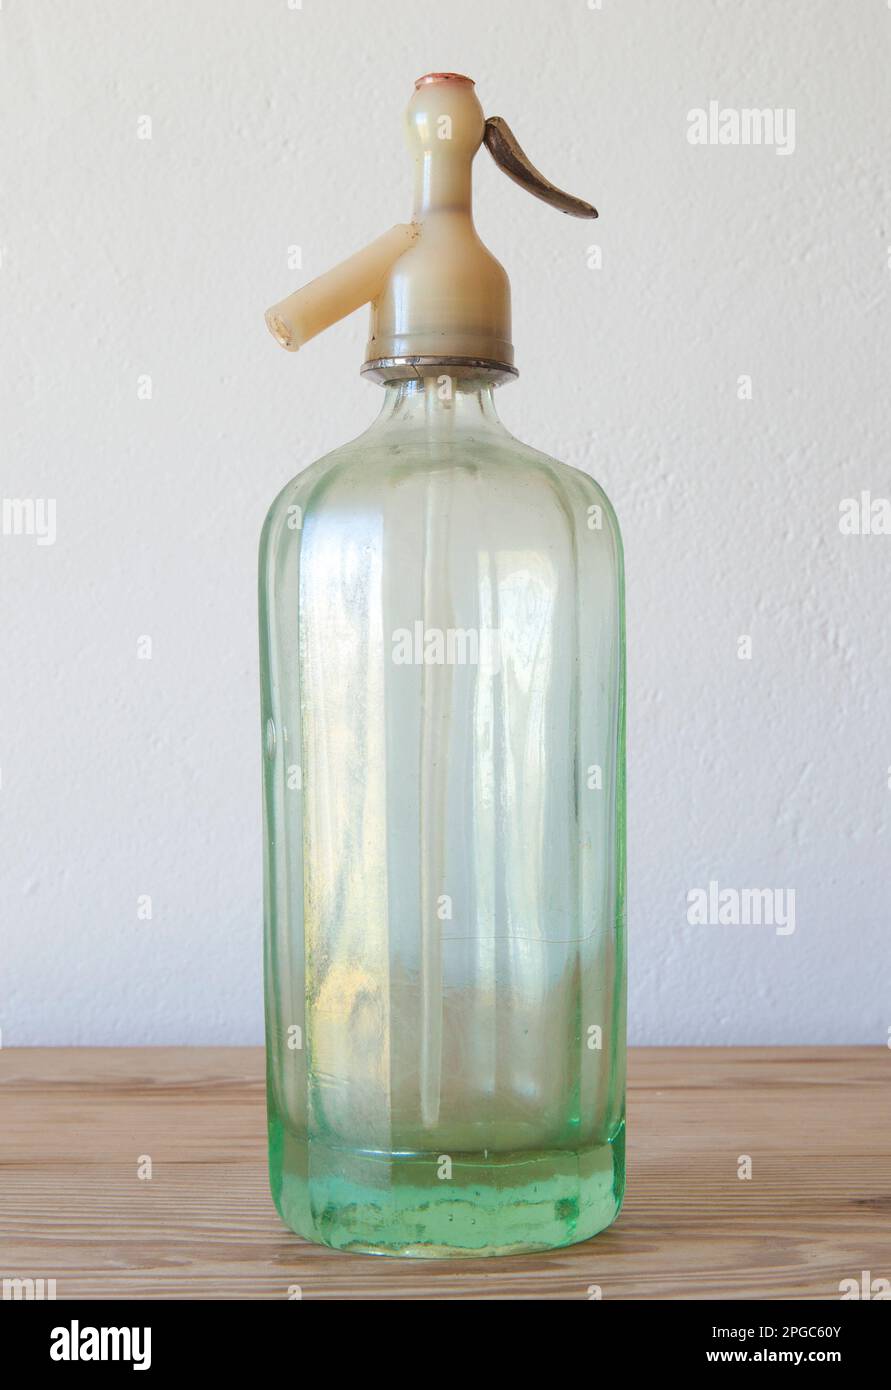 https://c8.alamy.com/comp/2PGC60Y/old-glass-soda-siphon-wooden-surface-2PGC60Y.jpg